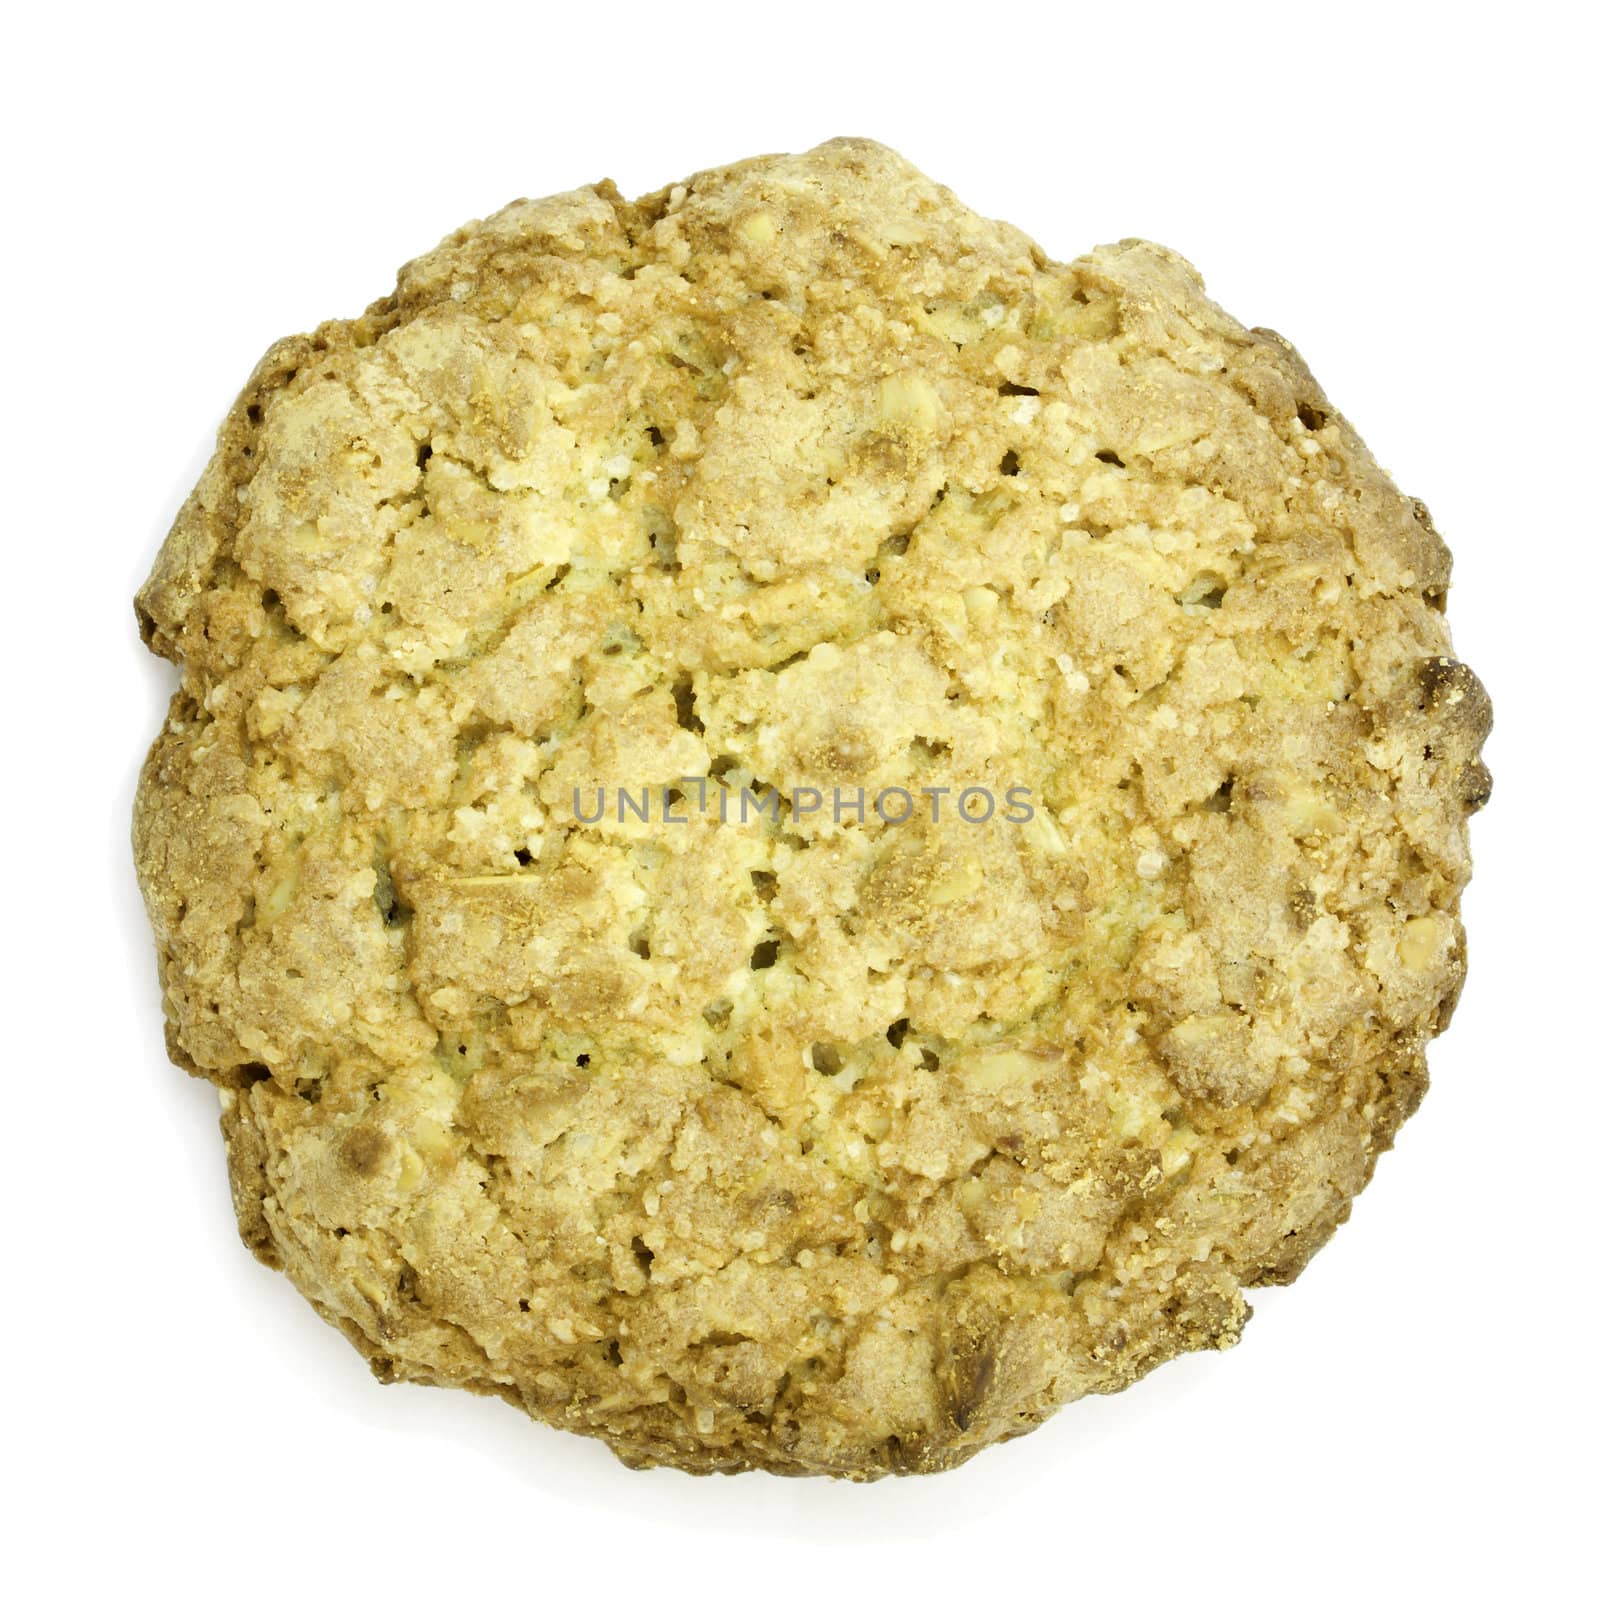 Cookies wholemeal with sunflower seeds on a white background